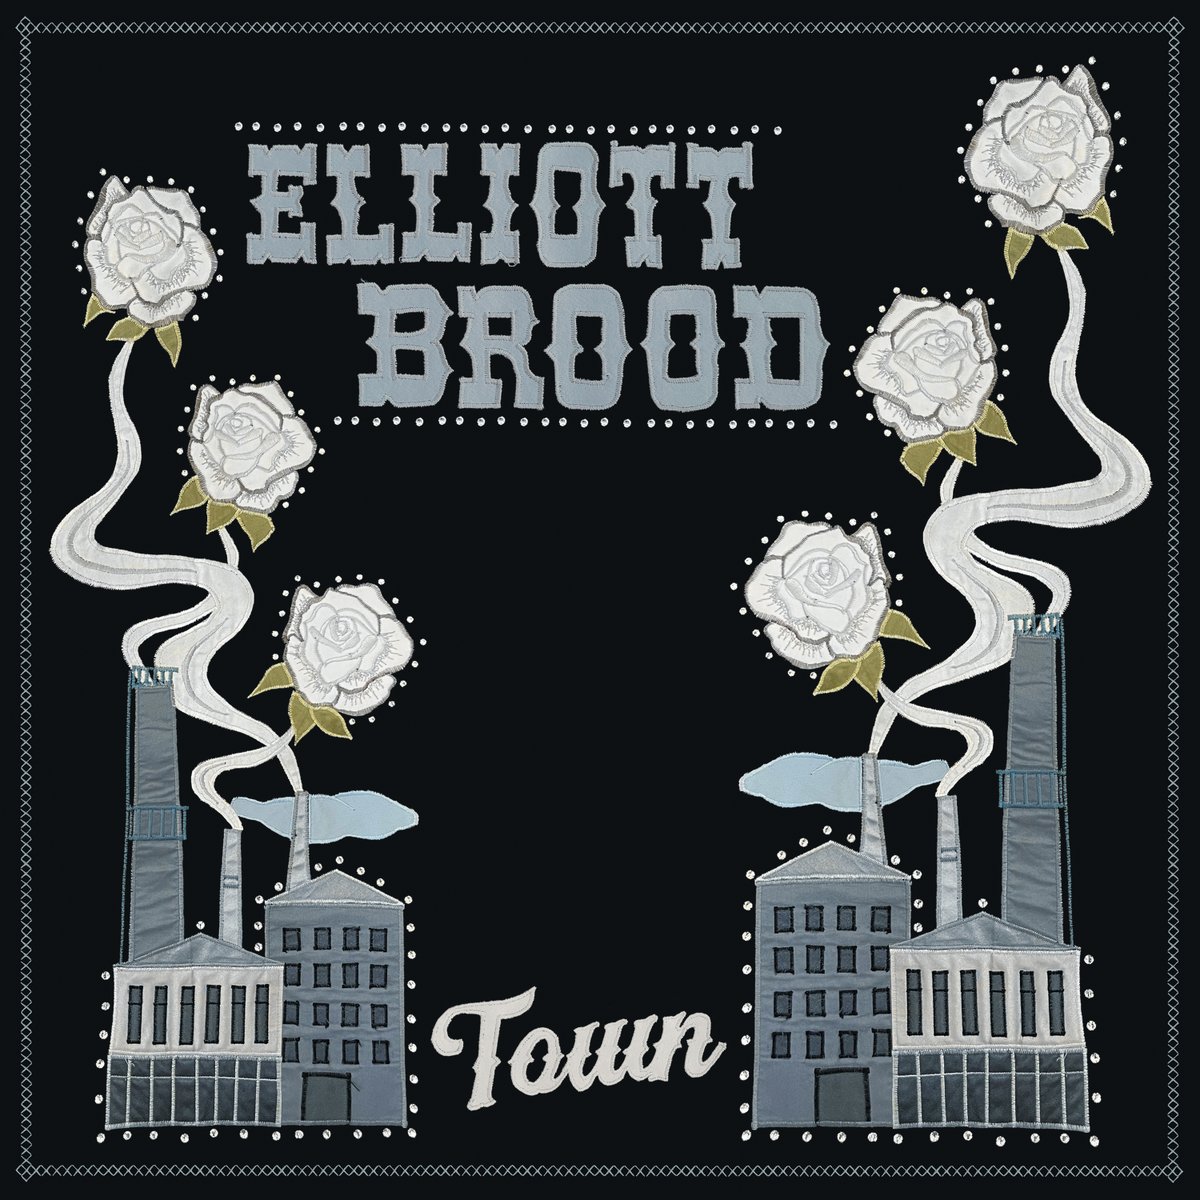 Congratulations to @ElliottBROOD who just released their newest album “Town” on Friday on Six Shooter Records. Look forward to seeing you out on the road! Listen - bio.to/ElliottBrood